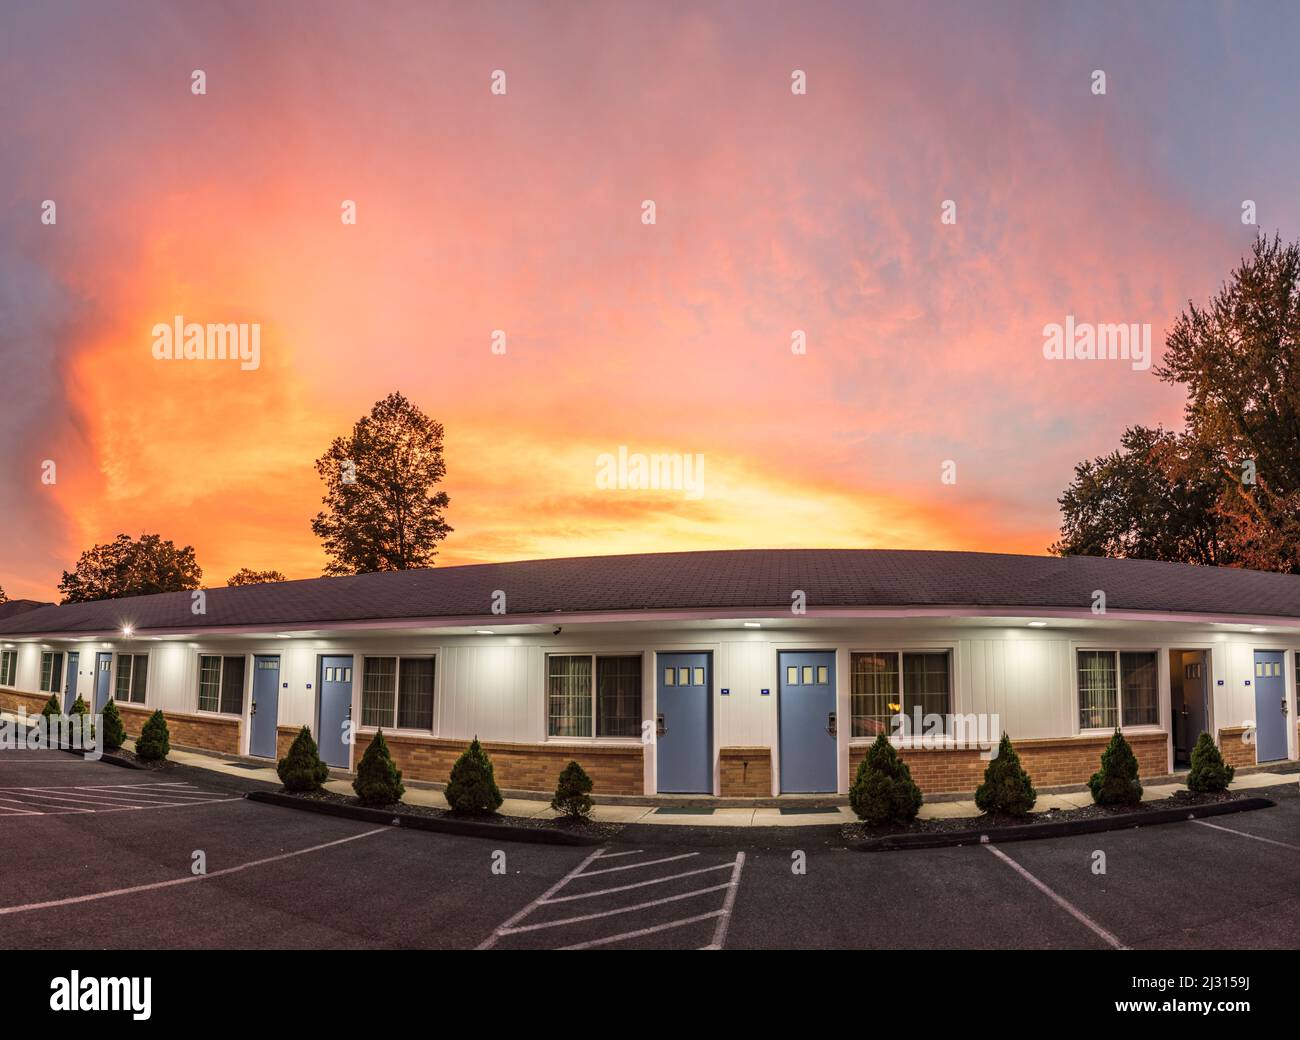 PITTSFIELD, USA - SEP 21, 2017: typical american Motel in Pittsfield, USA. These Motels are characterized by the parking lot in front of the room. Stock Photo